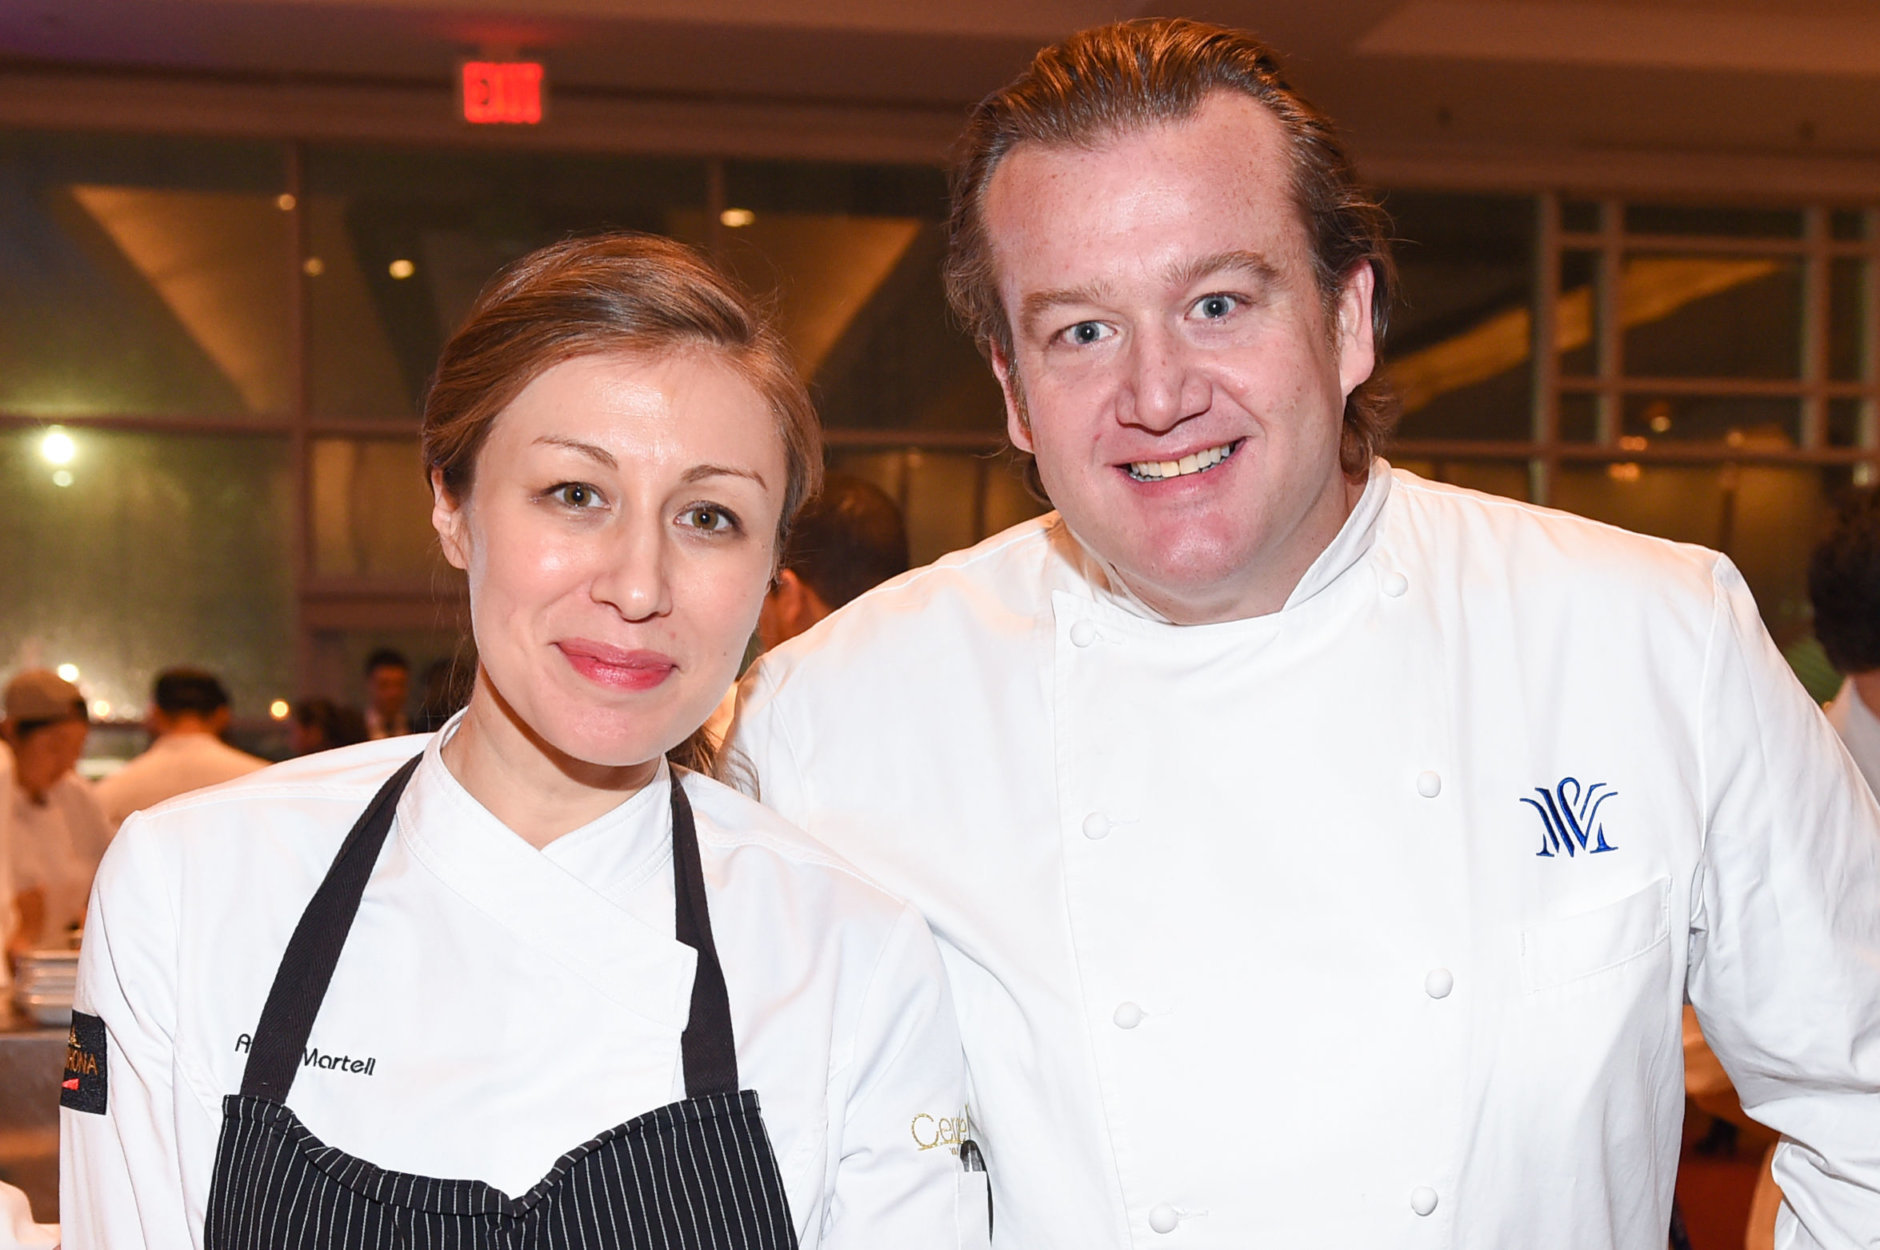 Chefs Alina Martell, left, and Michael White of AltaMarea Group attend the 25th Anniversary Benefit for Careers through Culinary Arts Program (C-CAP) at Pier Sixty on Tuesday, March 3, 2015, in New York. (Photo by Scott Roth/Invision/AP)